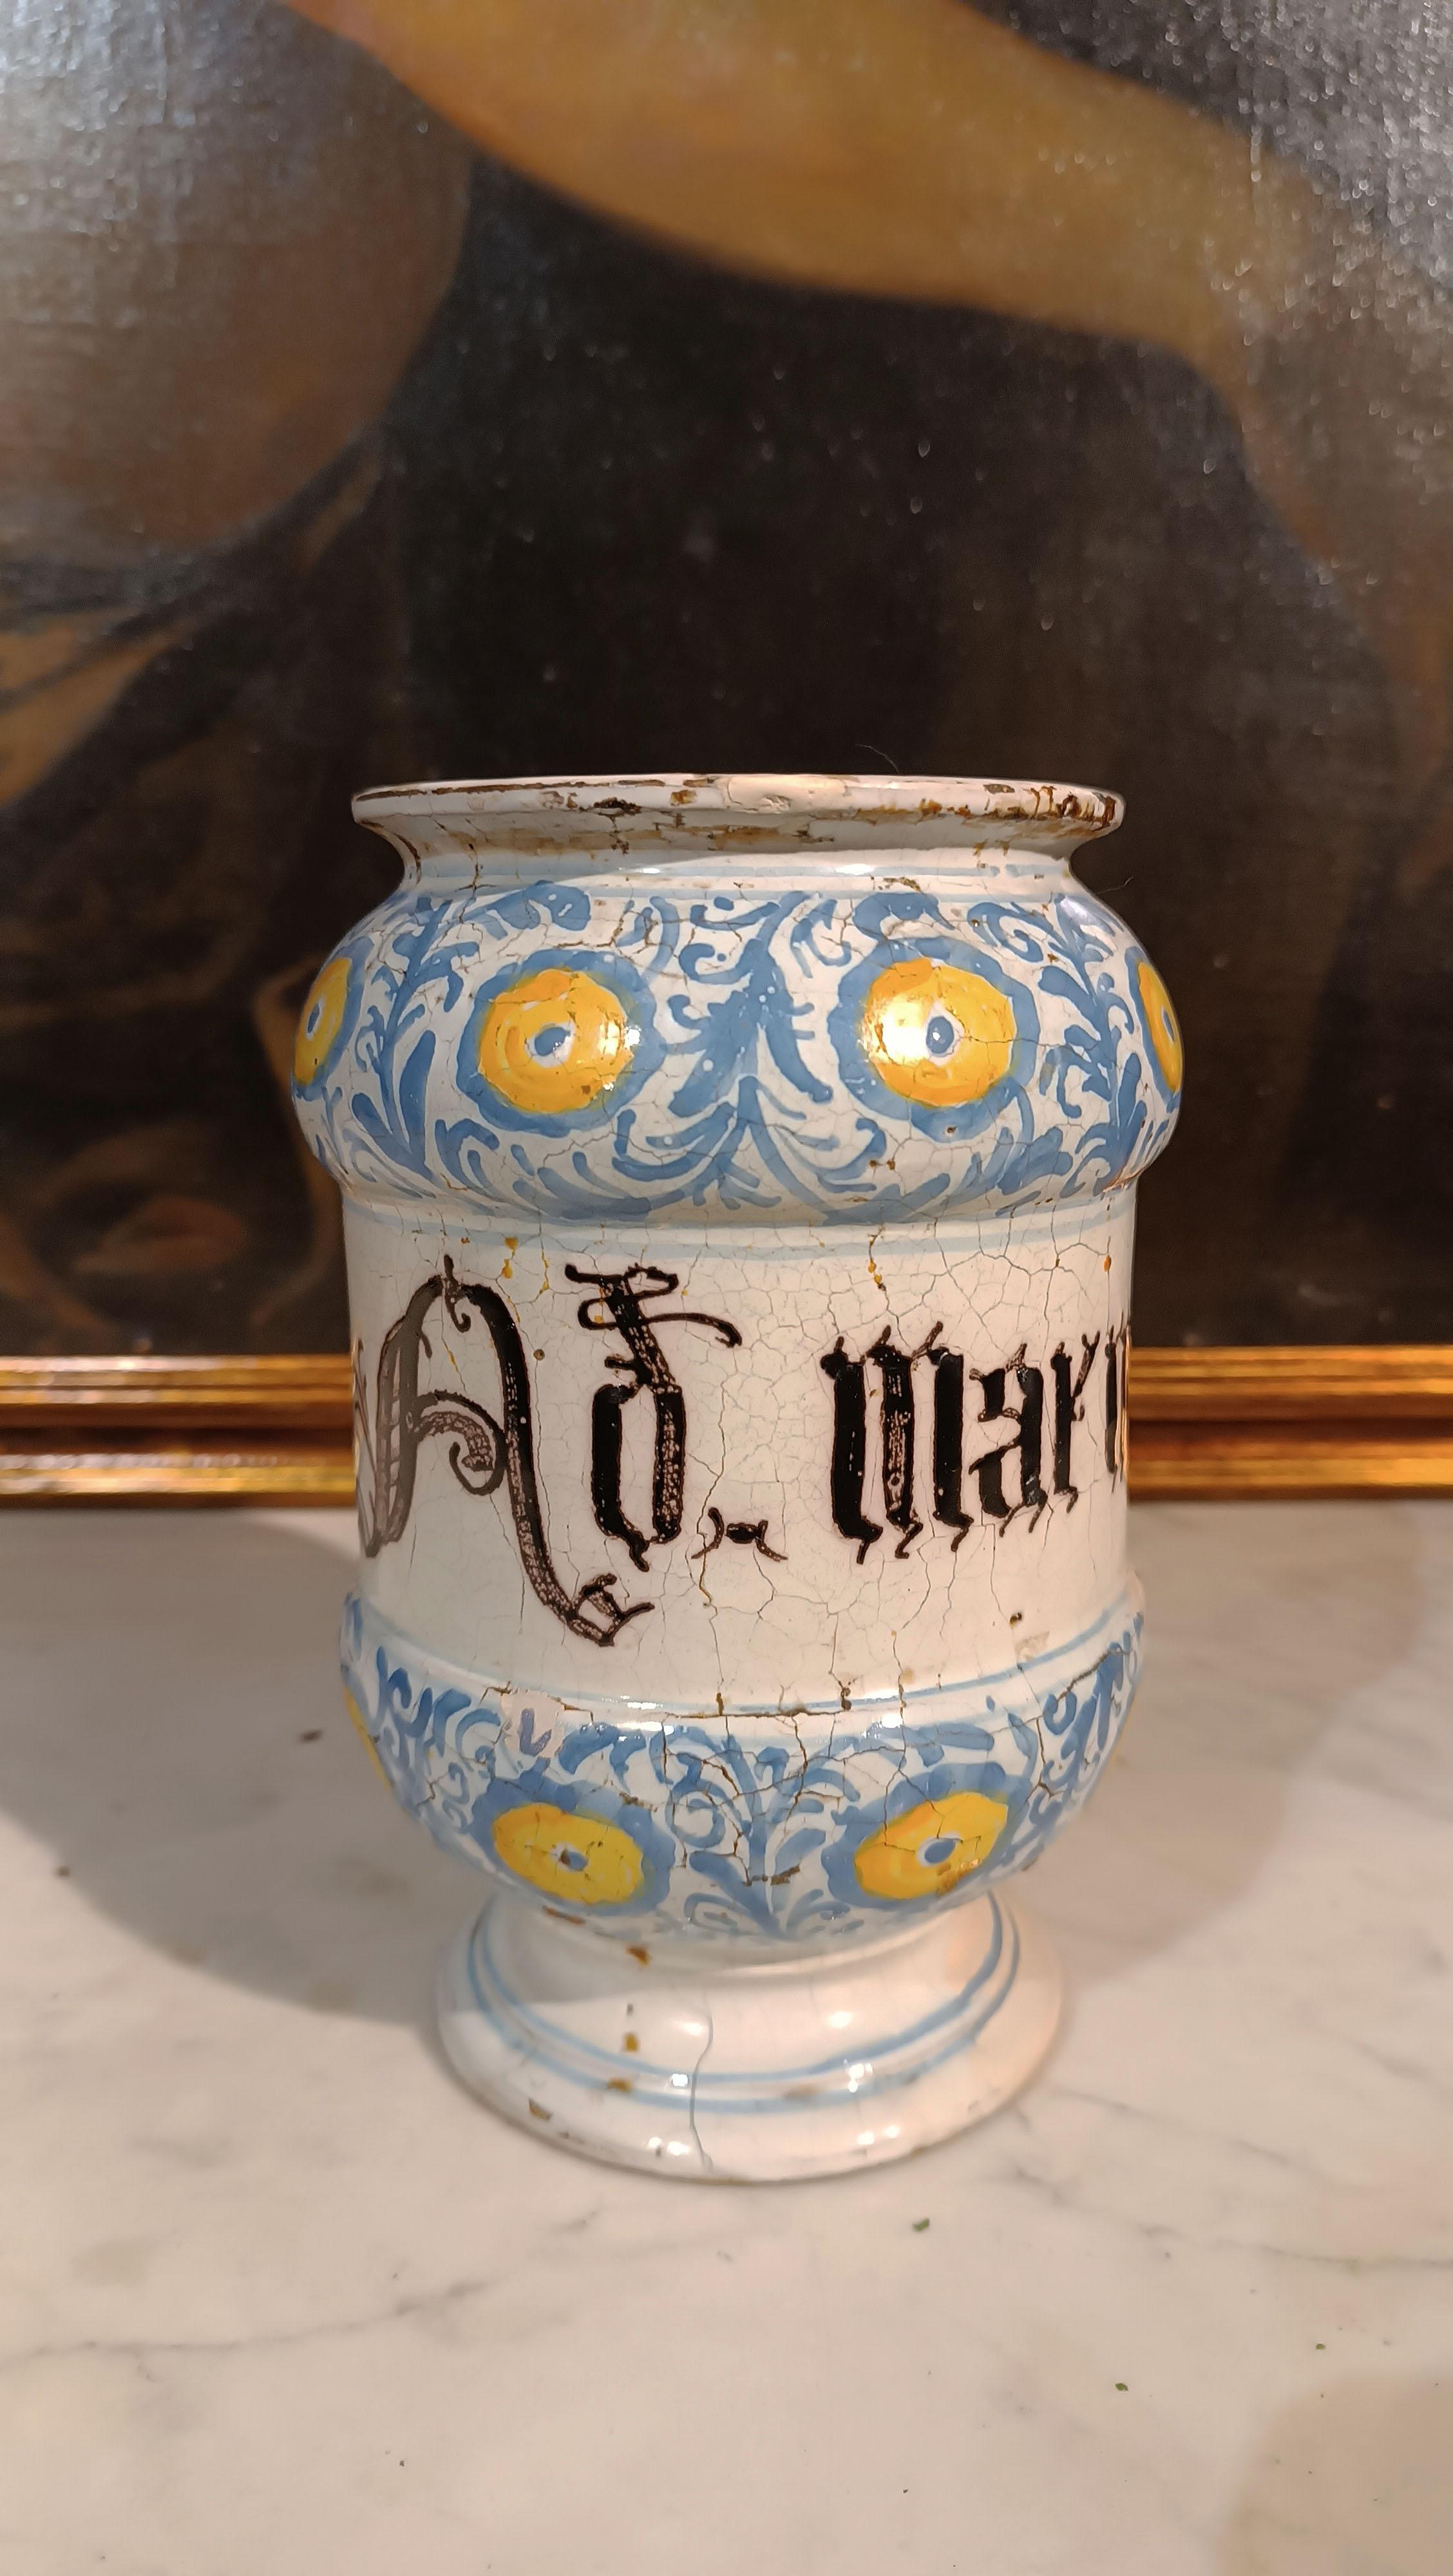 Pharmacy maiolica albarello, with a particular spool shape. The predominant glaze of the ceramic is white, on which there are decorations in blue and yellow. These decorations mainly consist of phytomorphic motifs, depicting stylized flowers, leaves